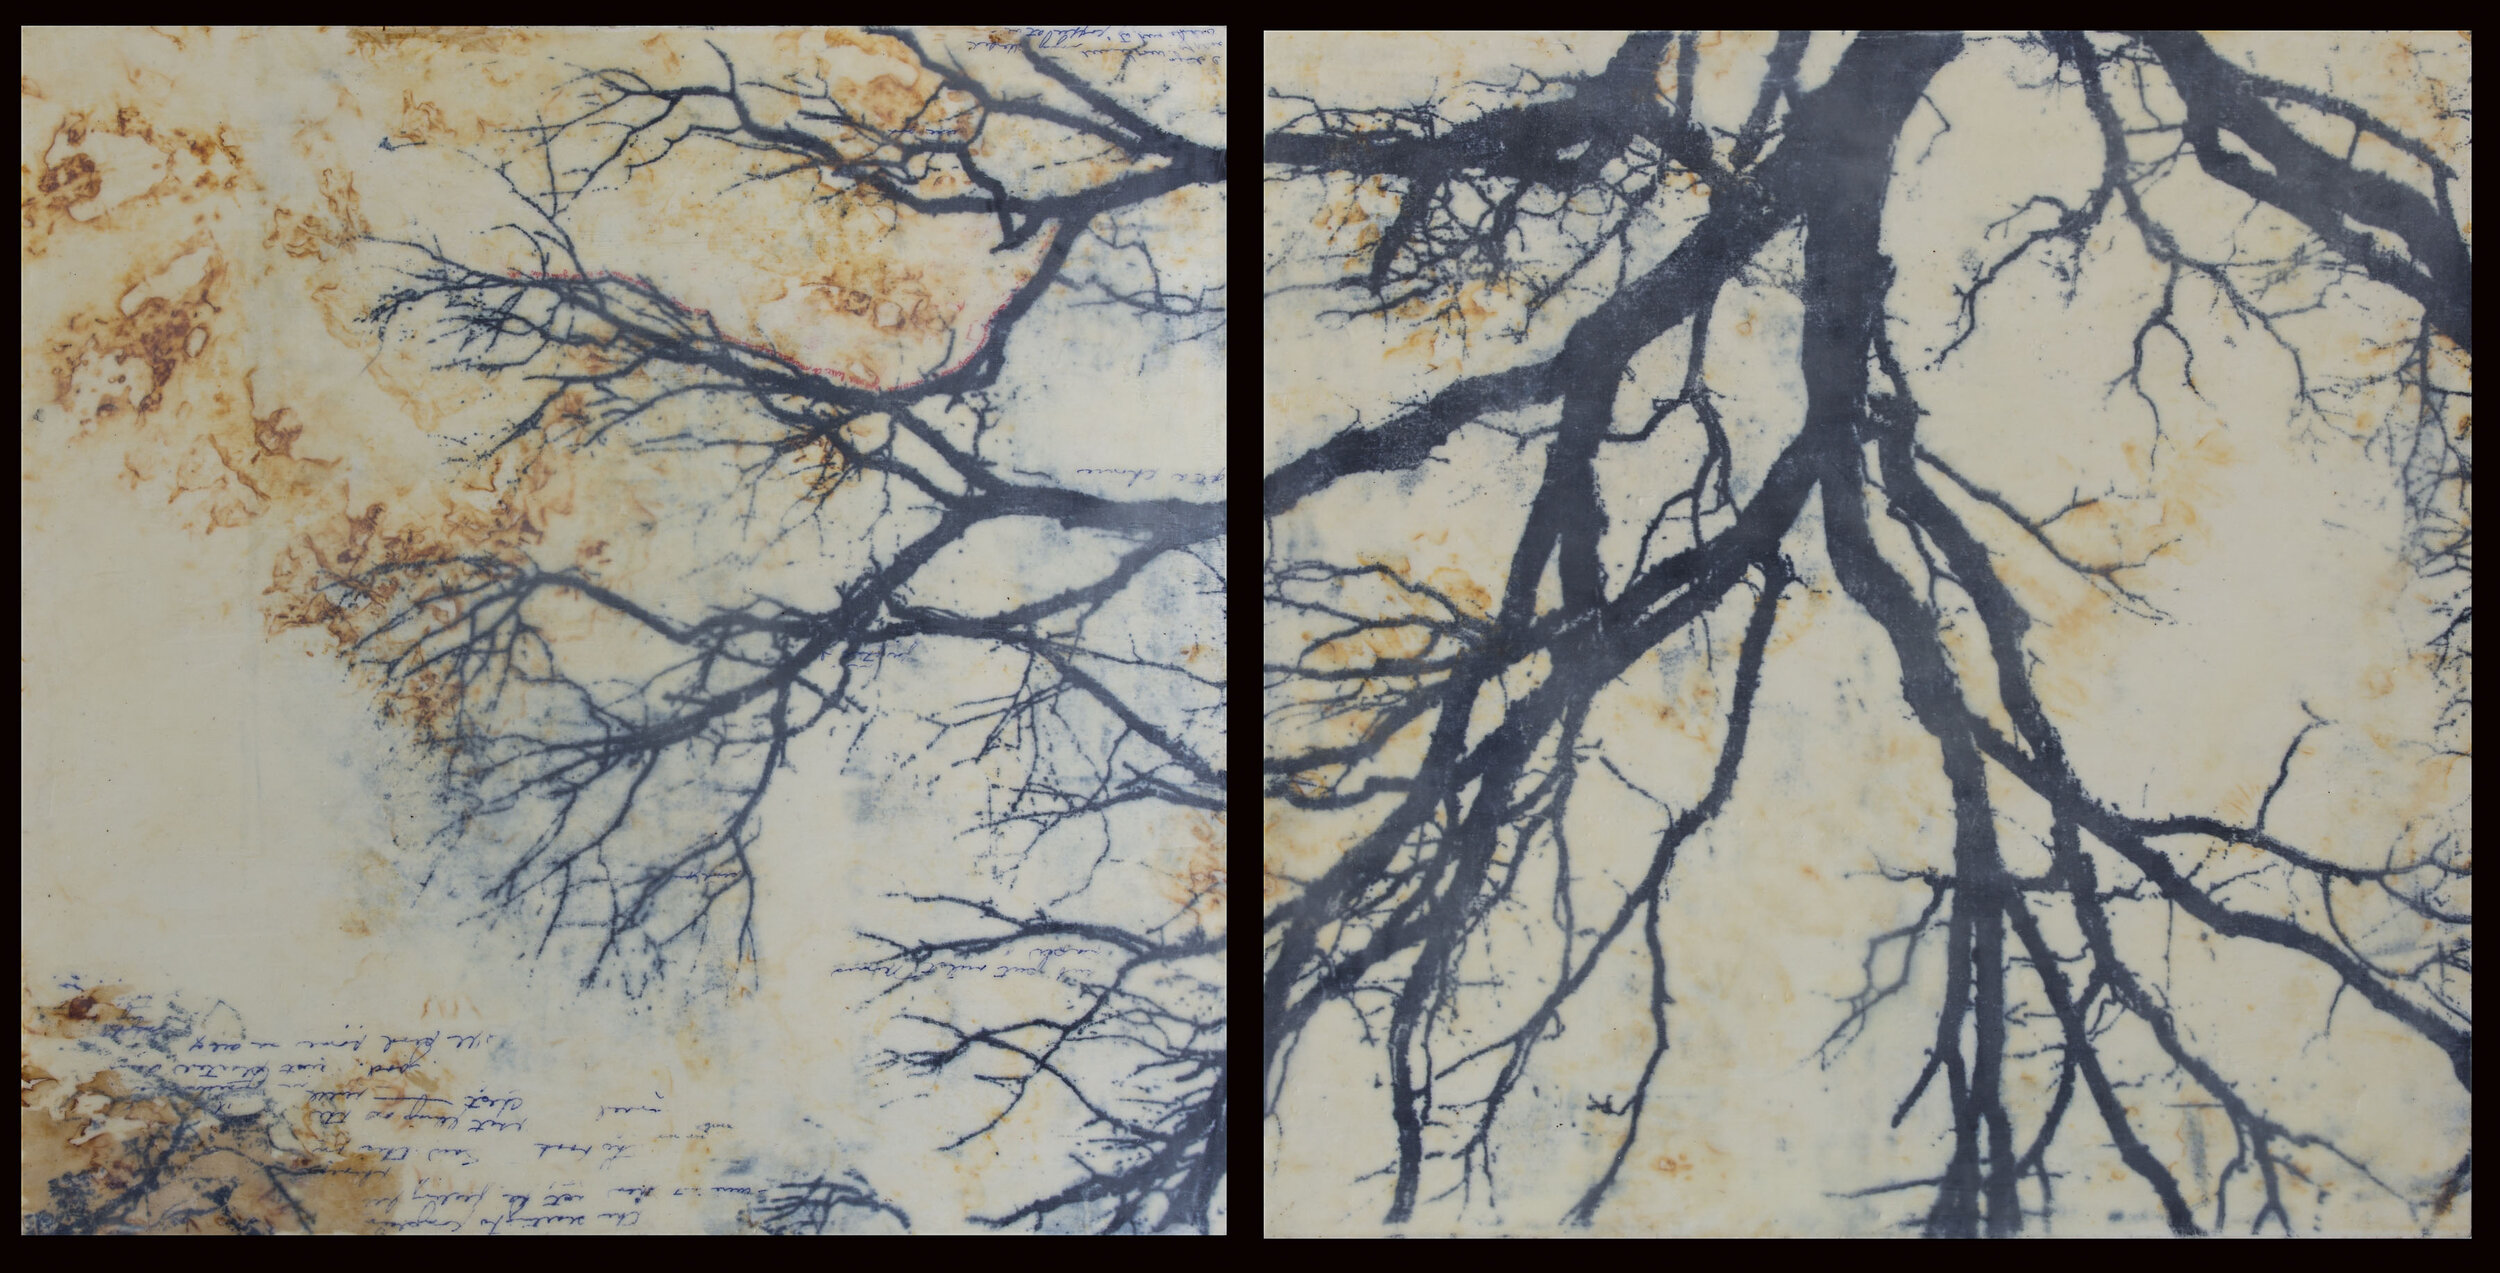   Branch Diptych , lithographic monoprint, rust print, encaustic on panel, 30 x 60 inches, SOLD 